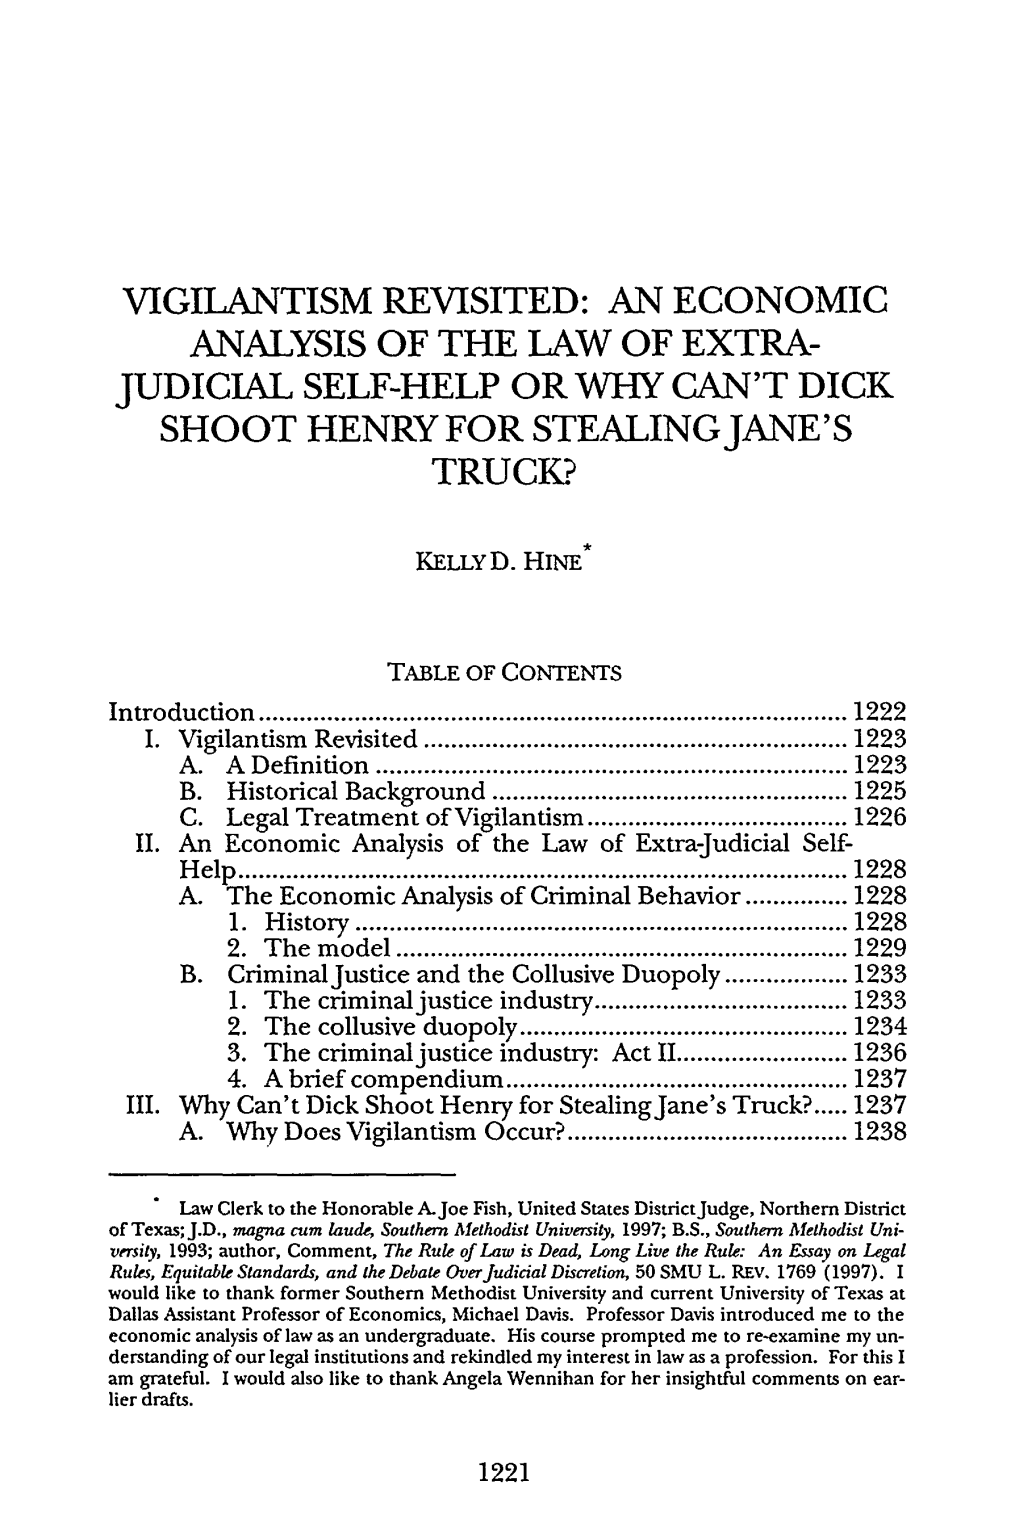 Vigilantism Revisited: an Economic Analysis of the Law of Extra- Judicial Self-Help Or Why Can't Dick Shoot Henry for Stealingjane's Truck?